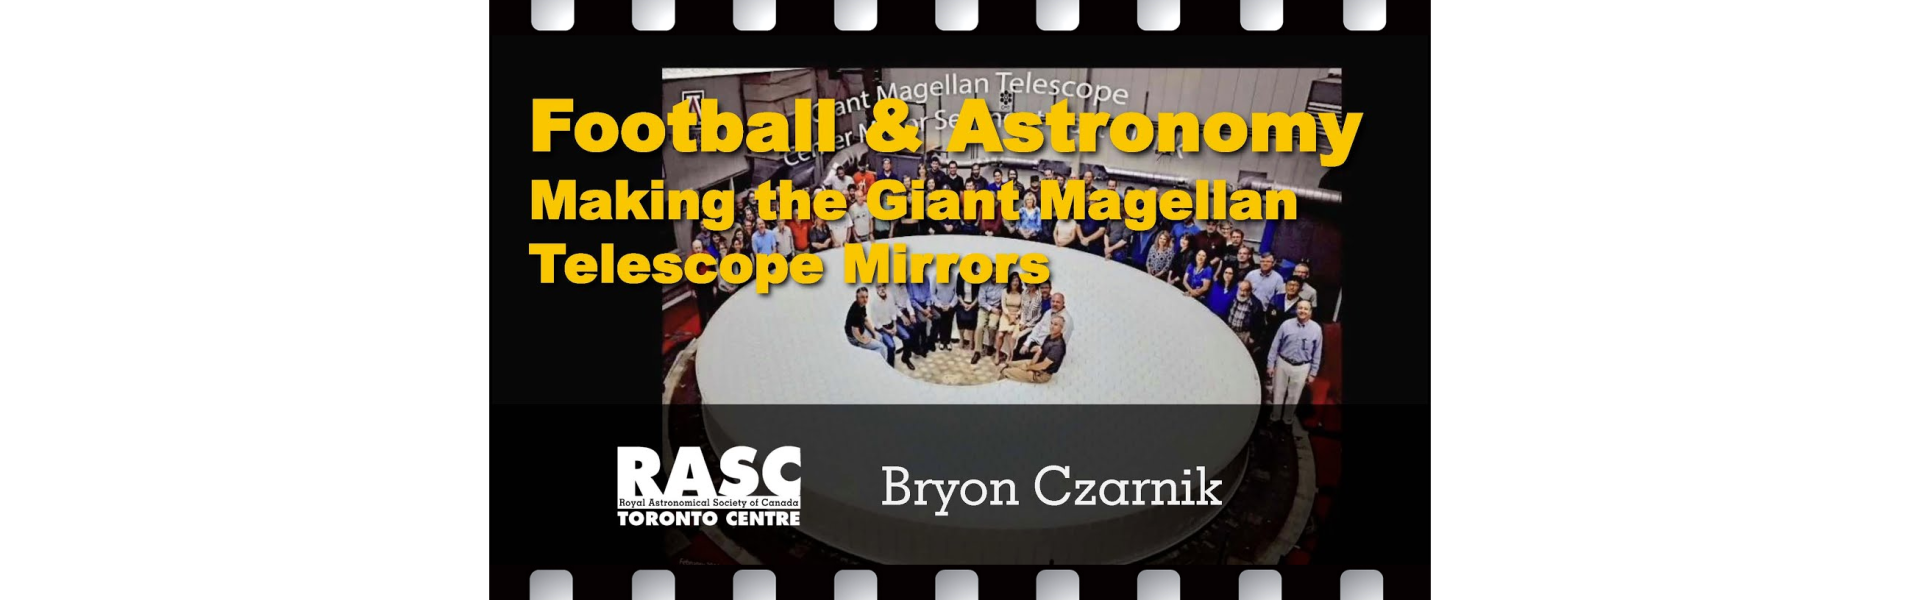 Football and Astronomy - The Making of the Giant Magellan Telescope Mirrors